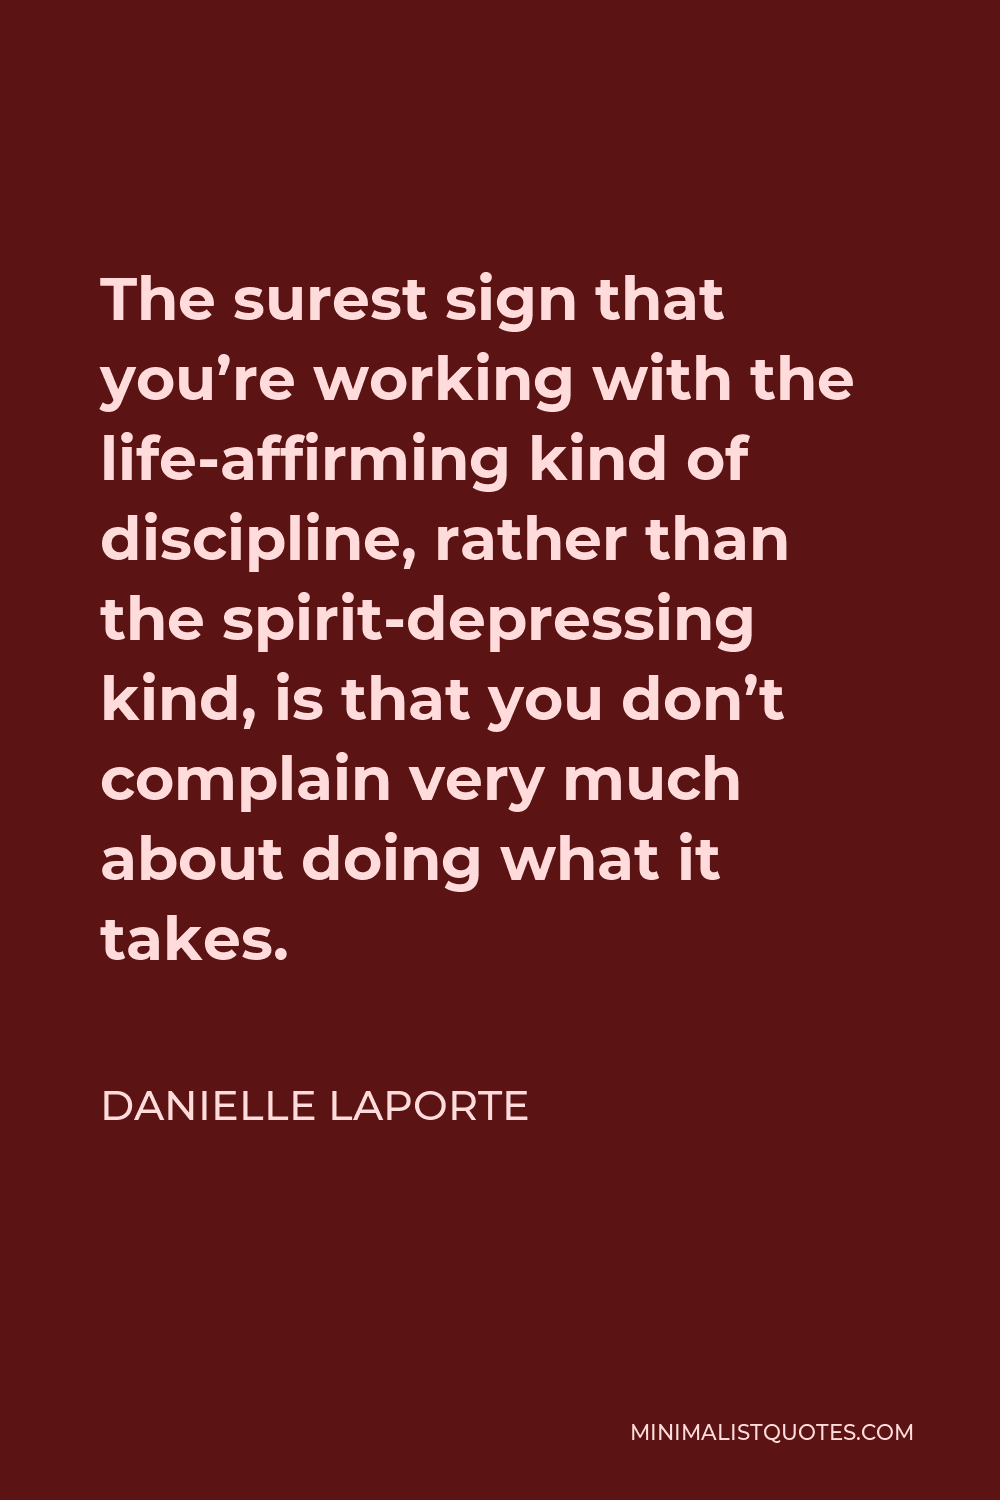 Danielle LaPorte Quote - The surest sign that you’re working with the life-affirming kind of discipline, rather than the spirit-depressing kind, is that you don’t complain very much about doing what it takes.